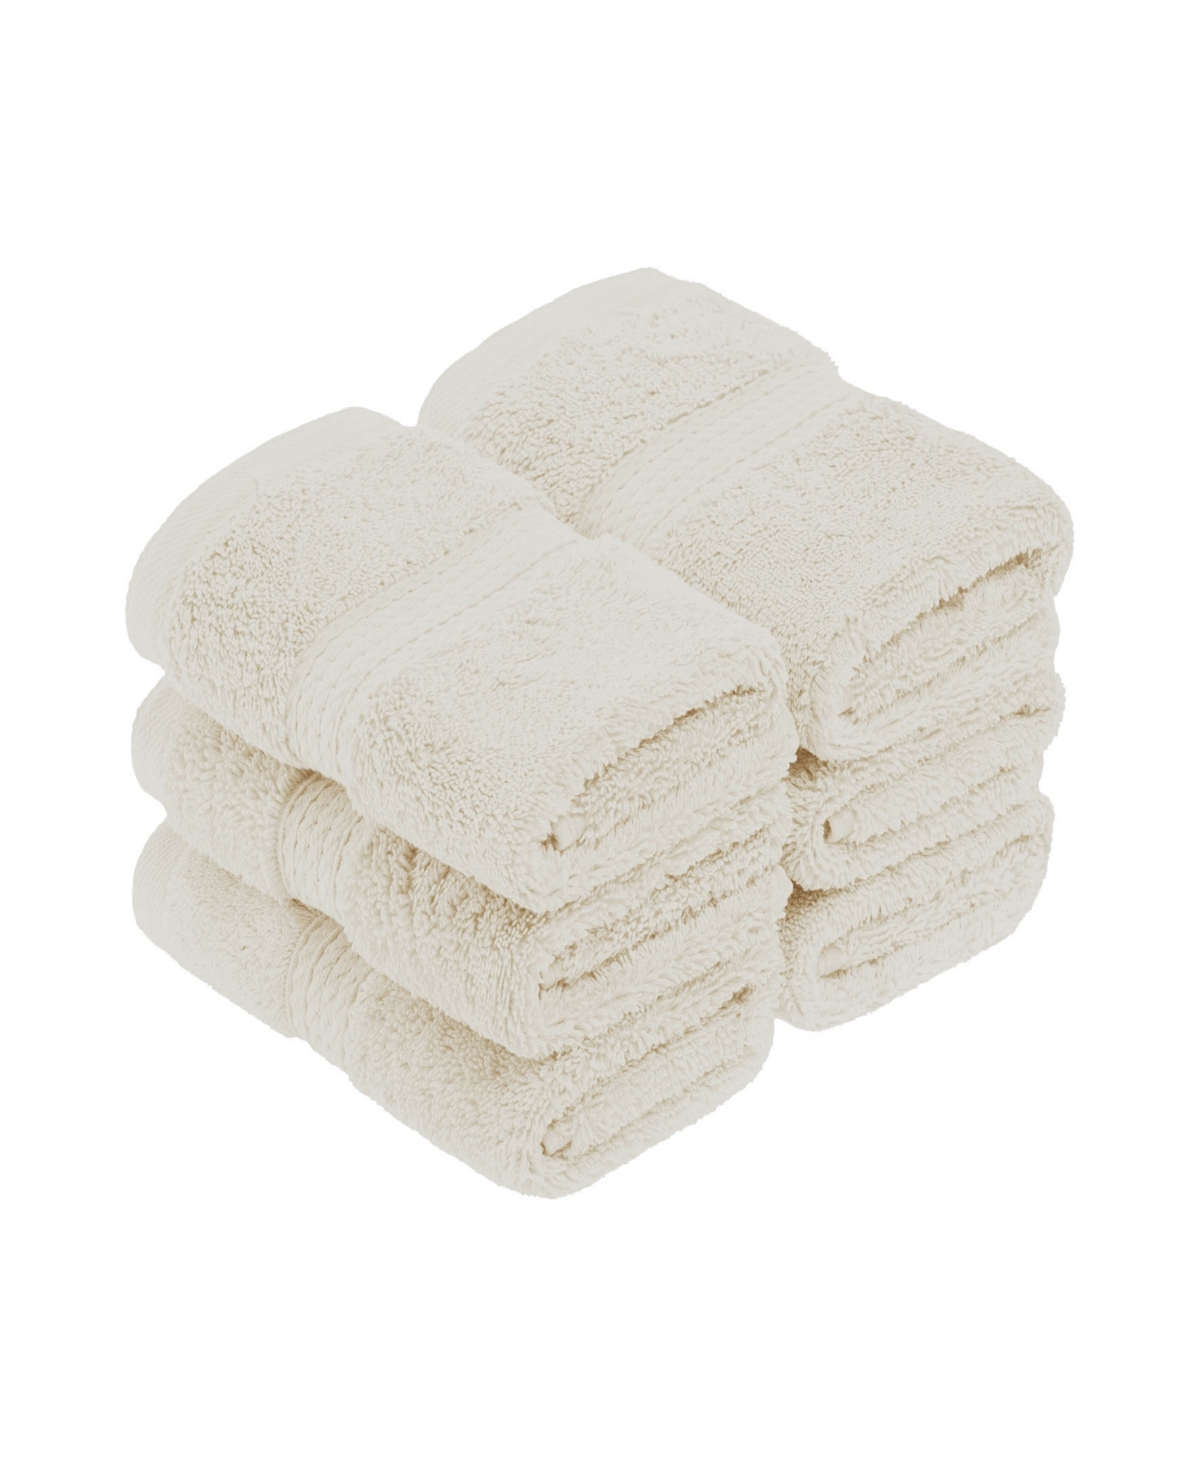 Superior Highly Absorbent 6 Piece Egyptian Cotton Ultra Plush Solid Face Towel Set Bedding In Cream